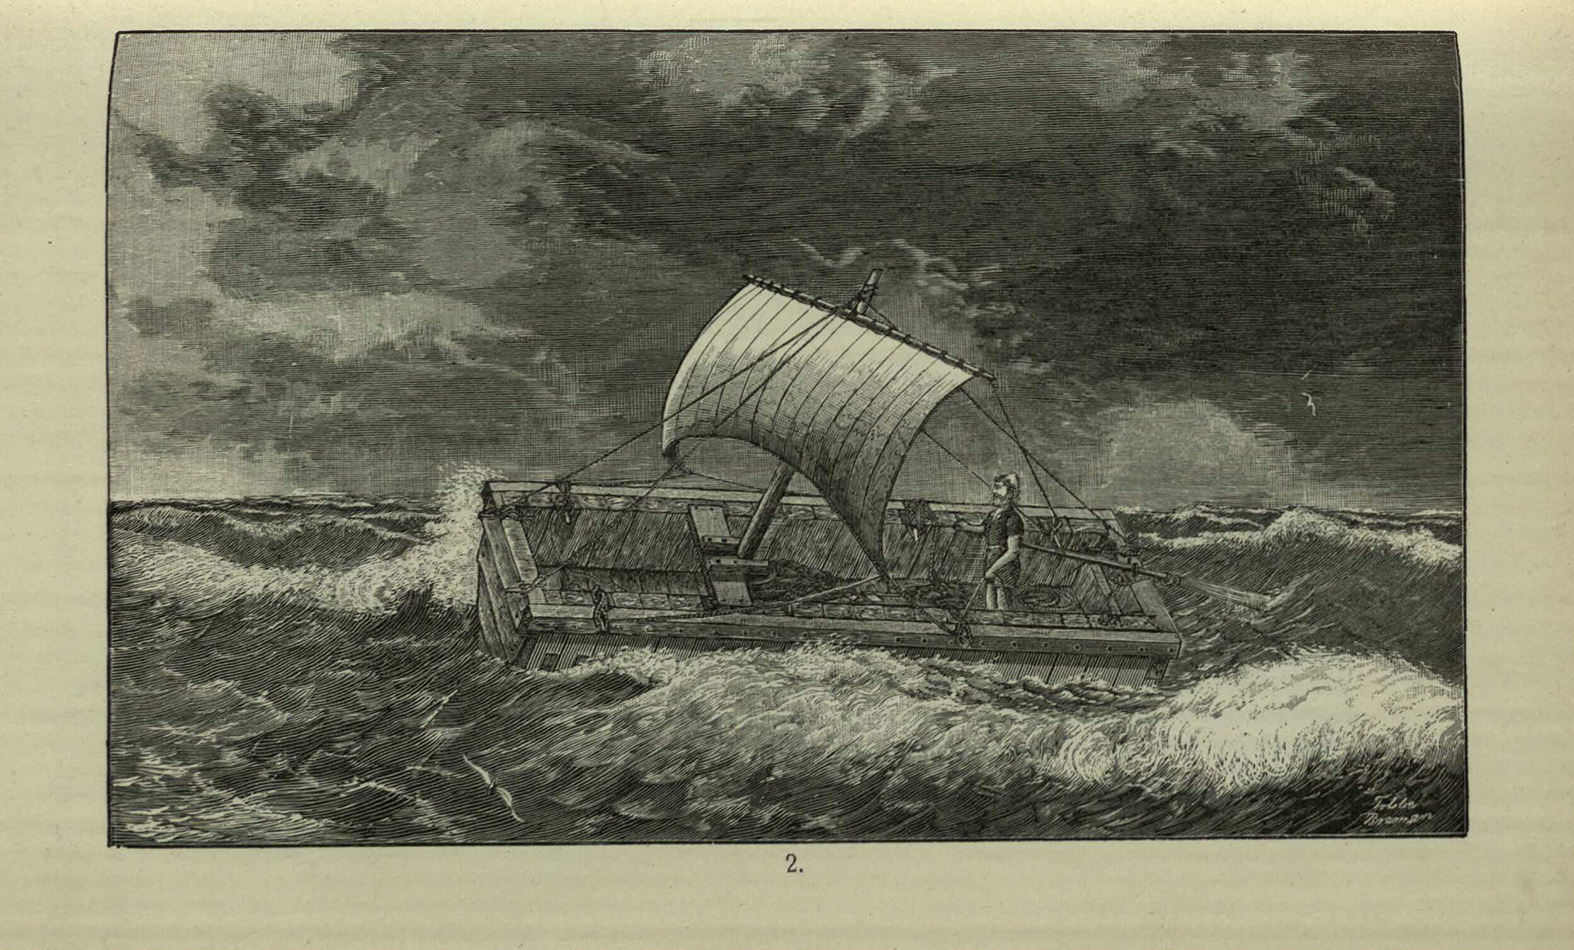 One of the plates from Die Nautic der Alten by Arthur Breusing, showing an example of an ancient ship. Breusing was a navigation instructor at the ‘Steuermannschule’ [Helmsman School]in Bremen.